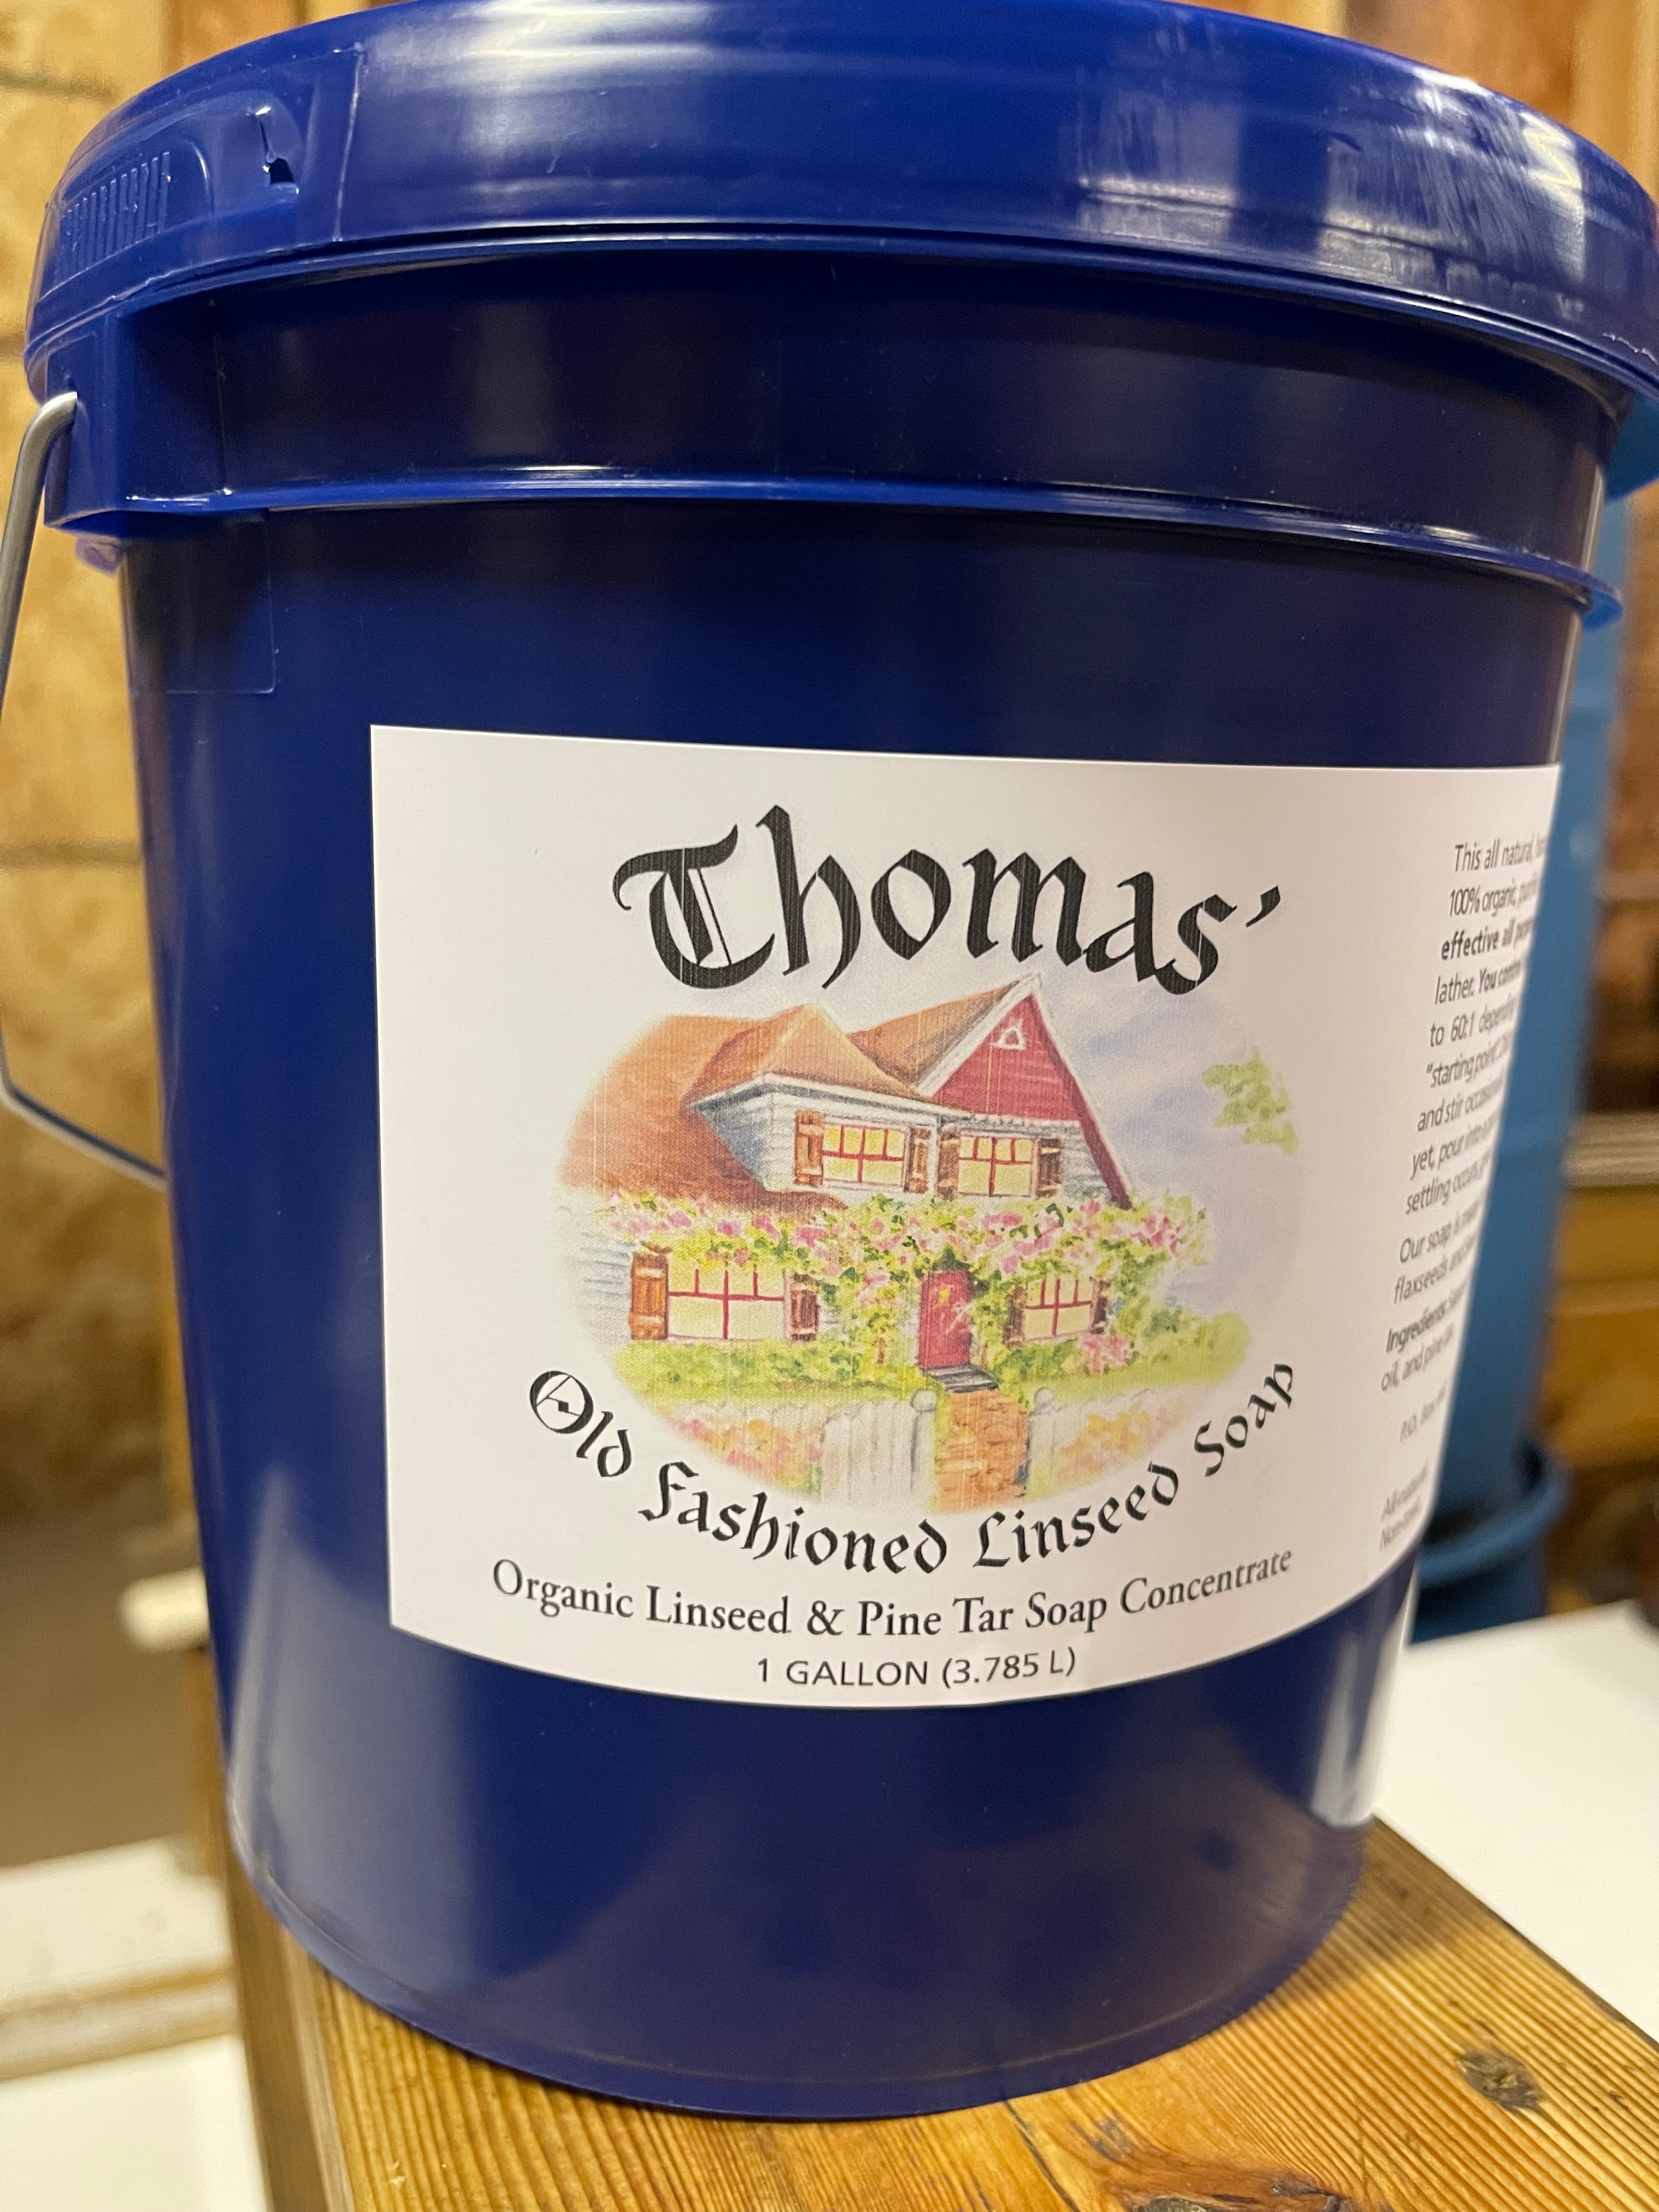 Thomas' Old Fashioned Linseed & Pine Tar Soap Concentrate - One Gallon